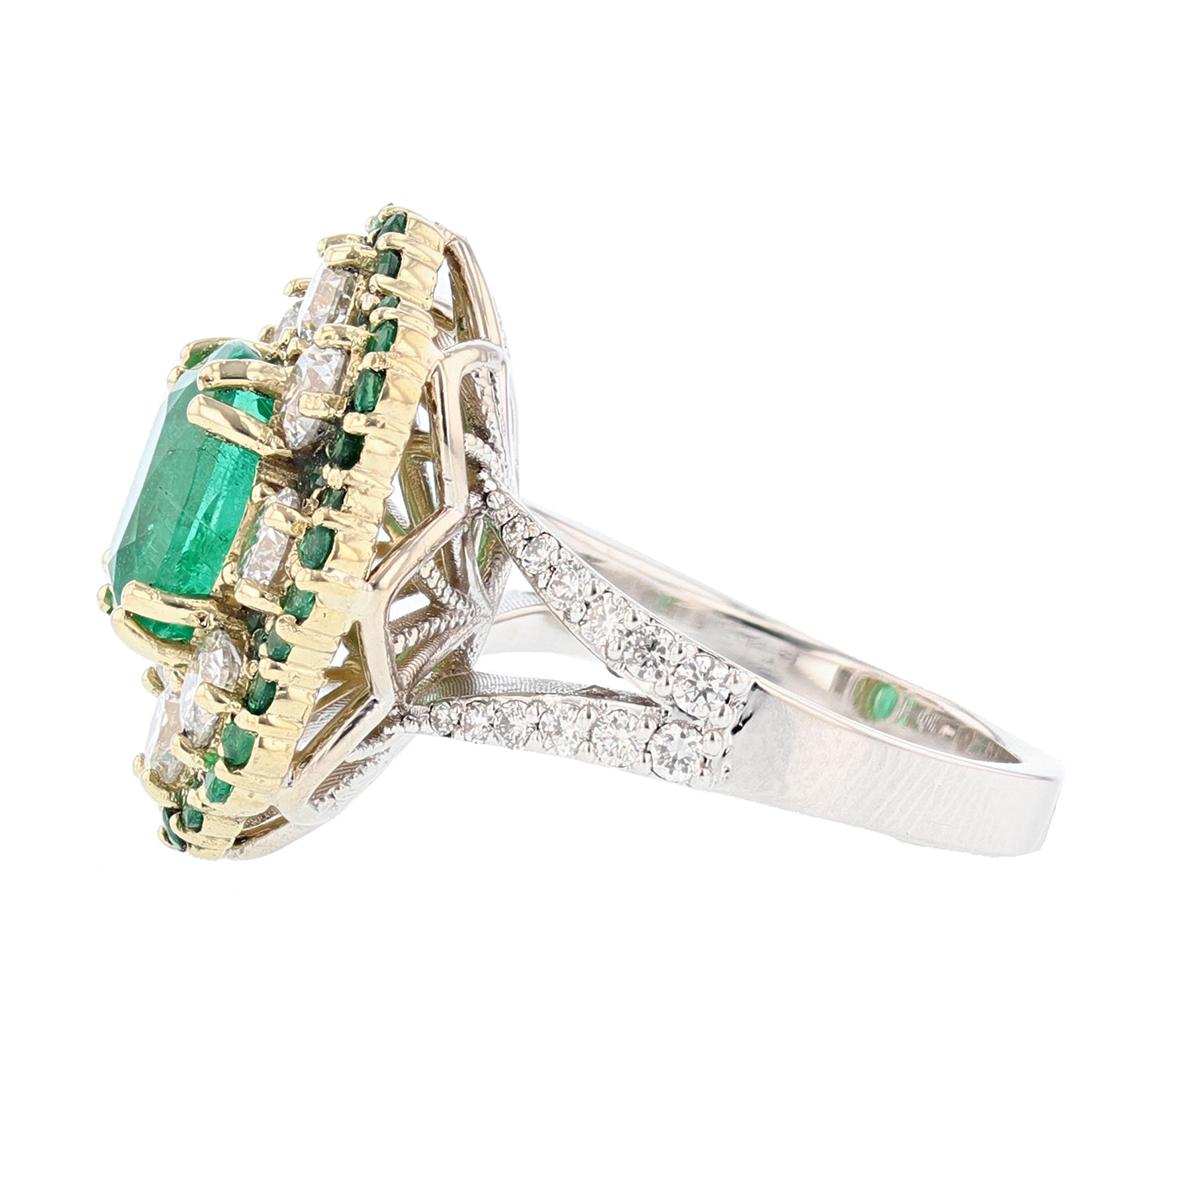 18 Karat White and Yellow Gold 2.66 Carat Emerald Diamond Cocktail Ring In New Condition For Sale In Houston, TX